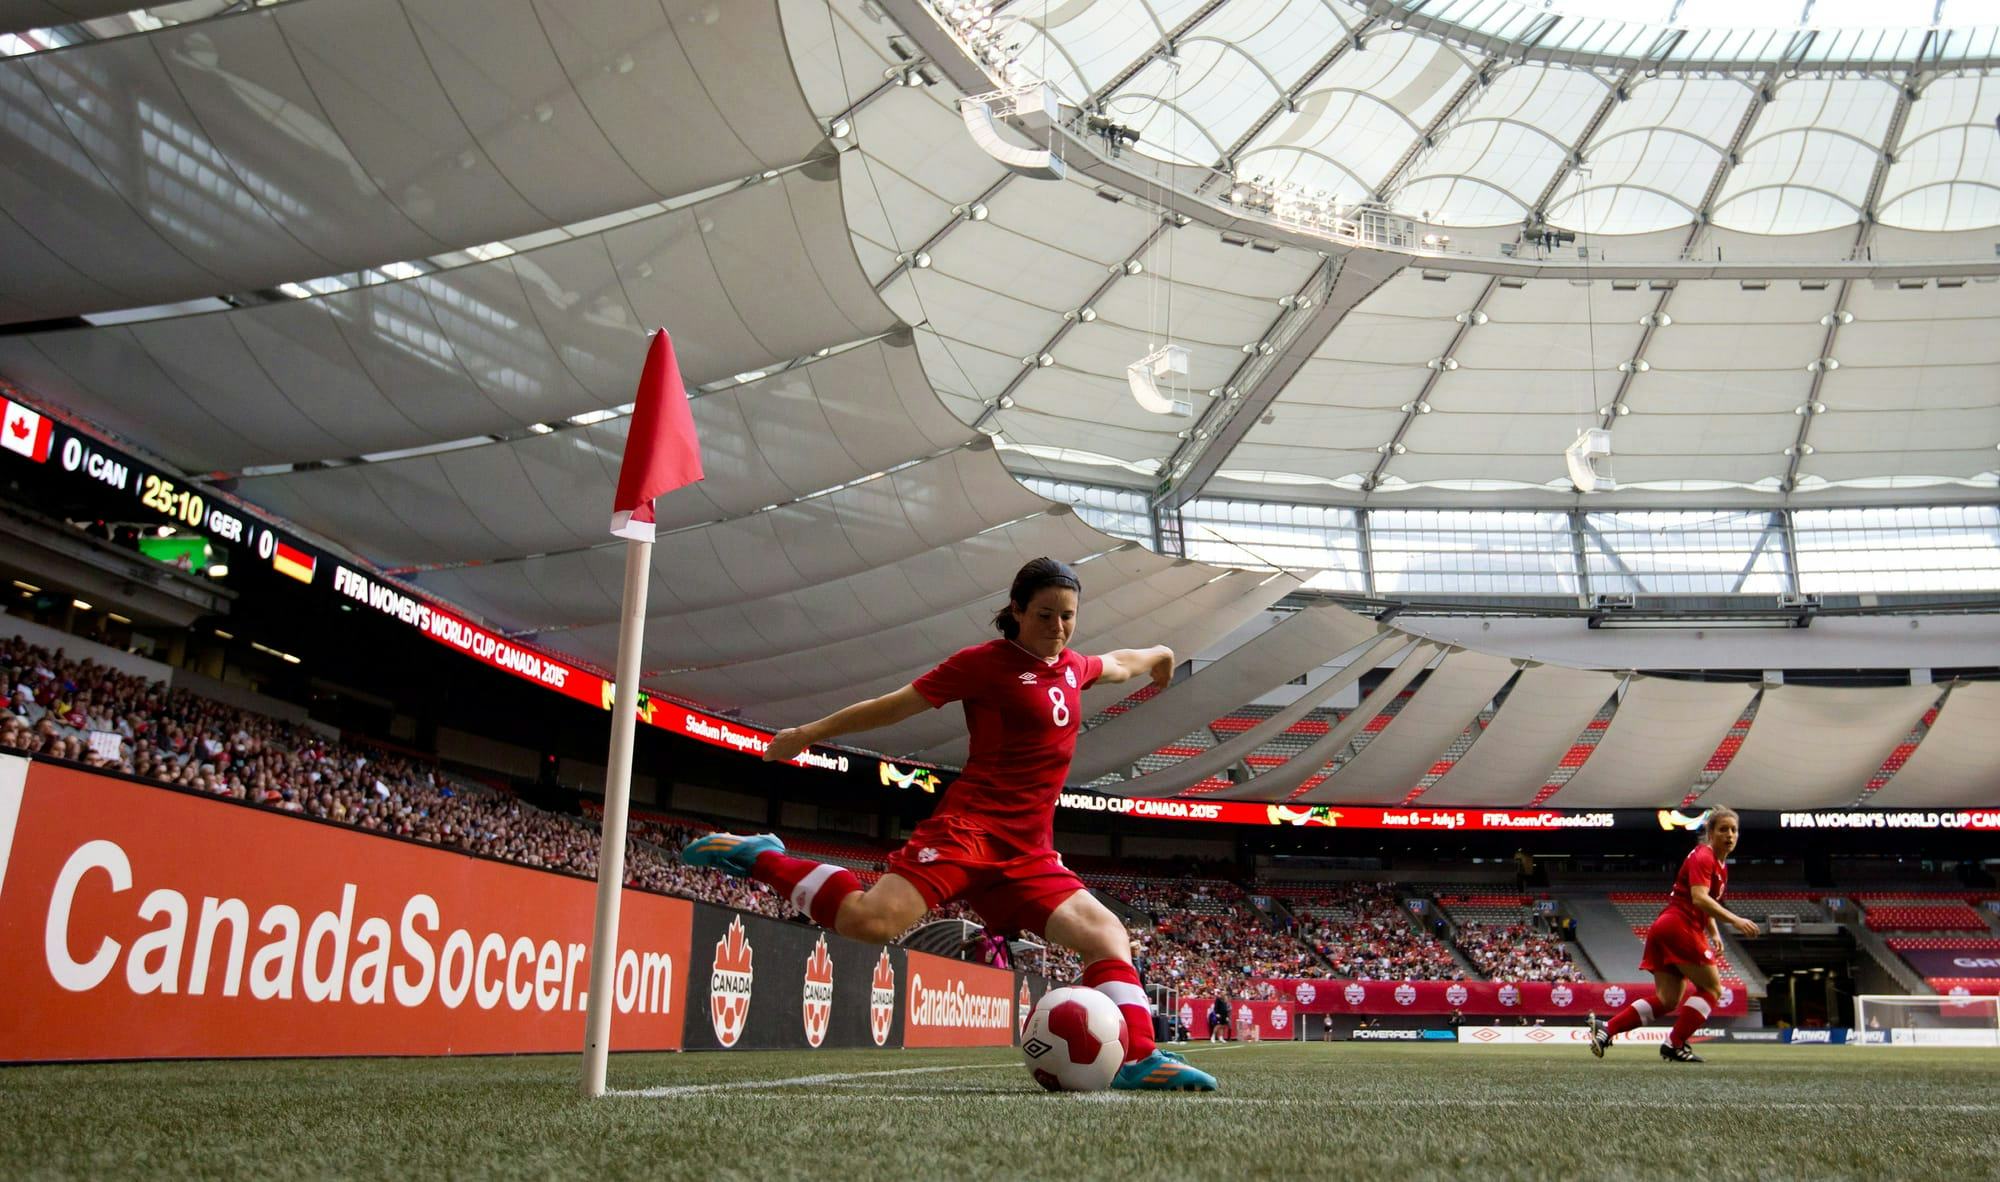 Soccer player Diana Matheson kicks a ball to her teammates from the corner of the field.